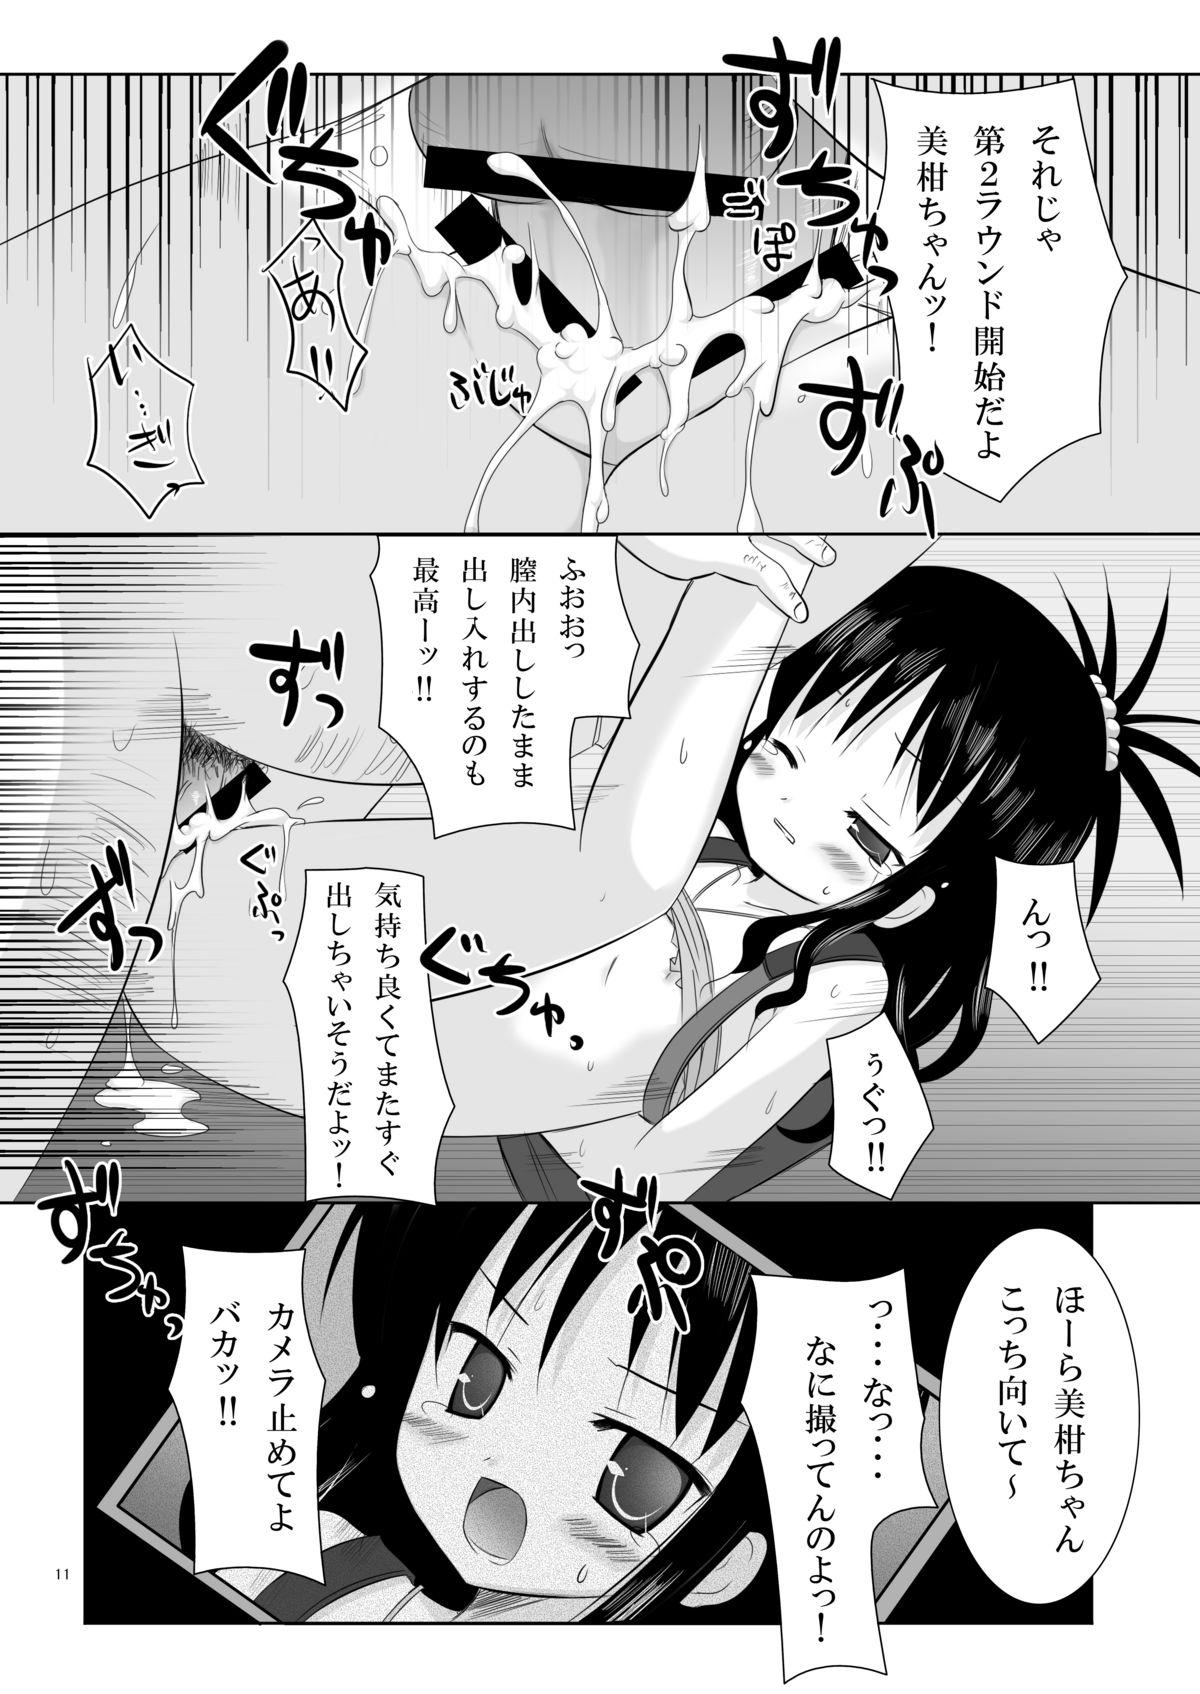 Clit Abduction - To love-ru Staxxx - Page 10